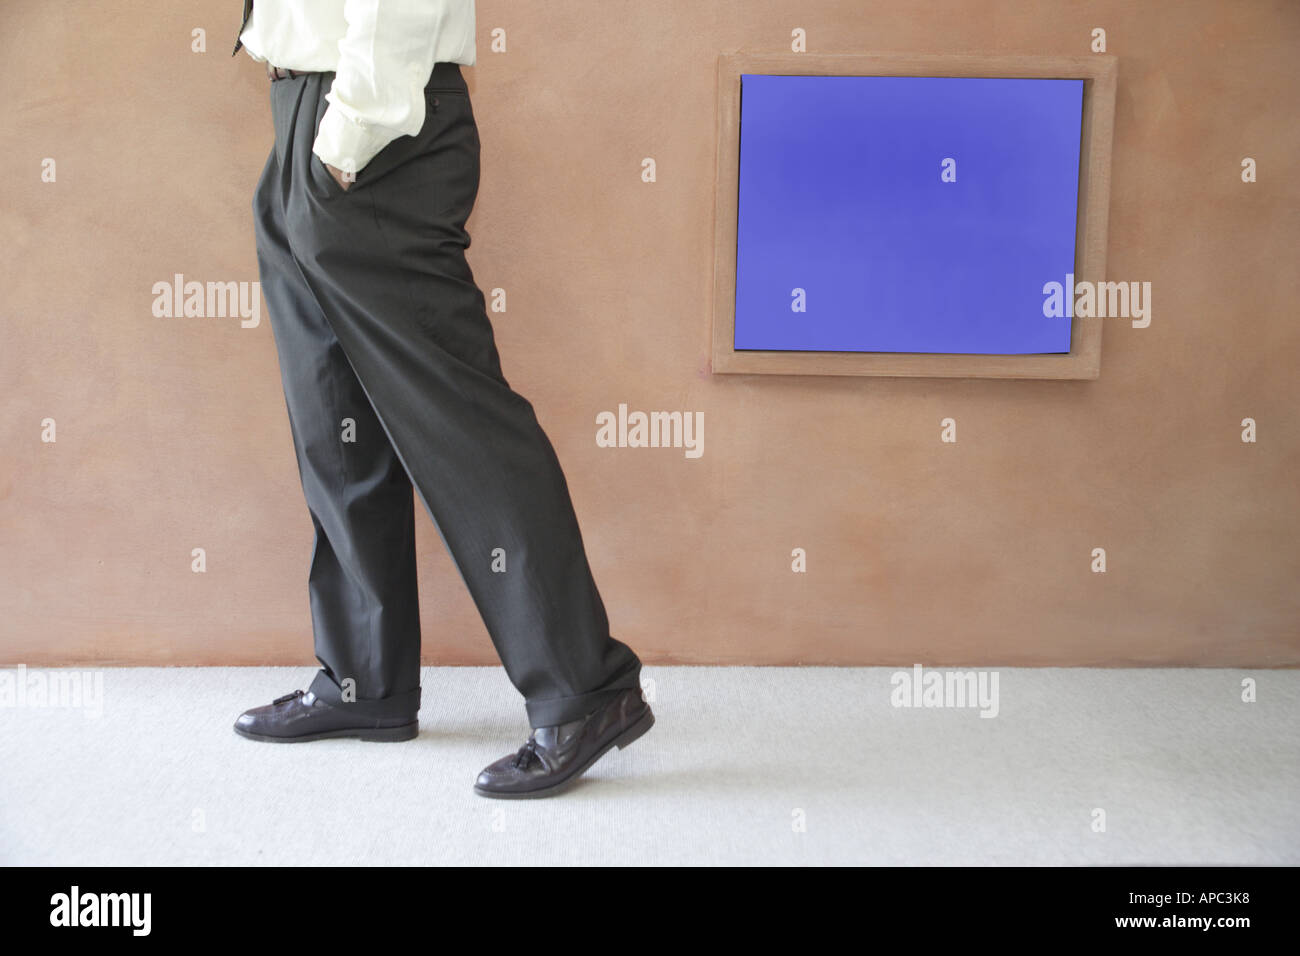 Legs of a businessman standing in front of a monitor Stock Photo